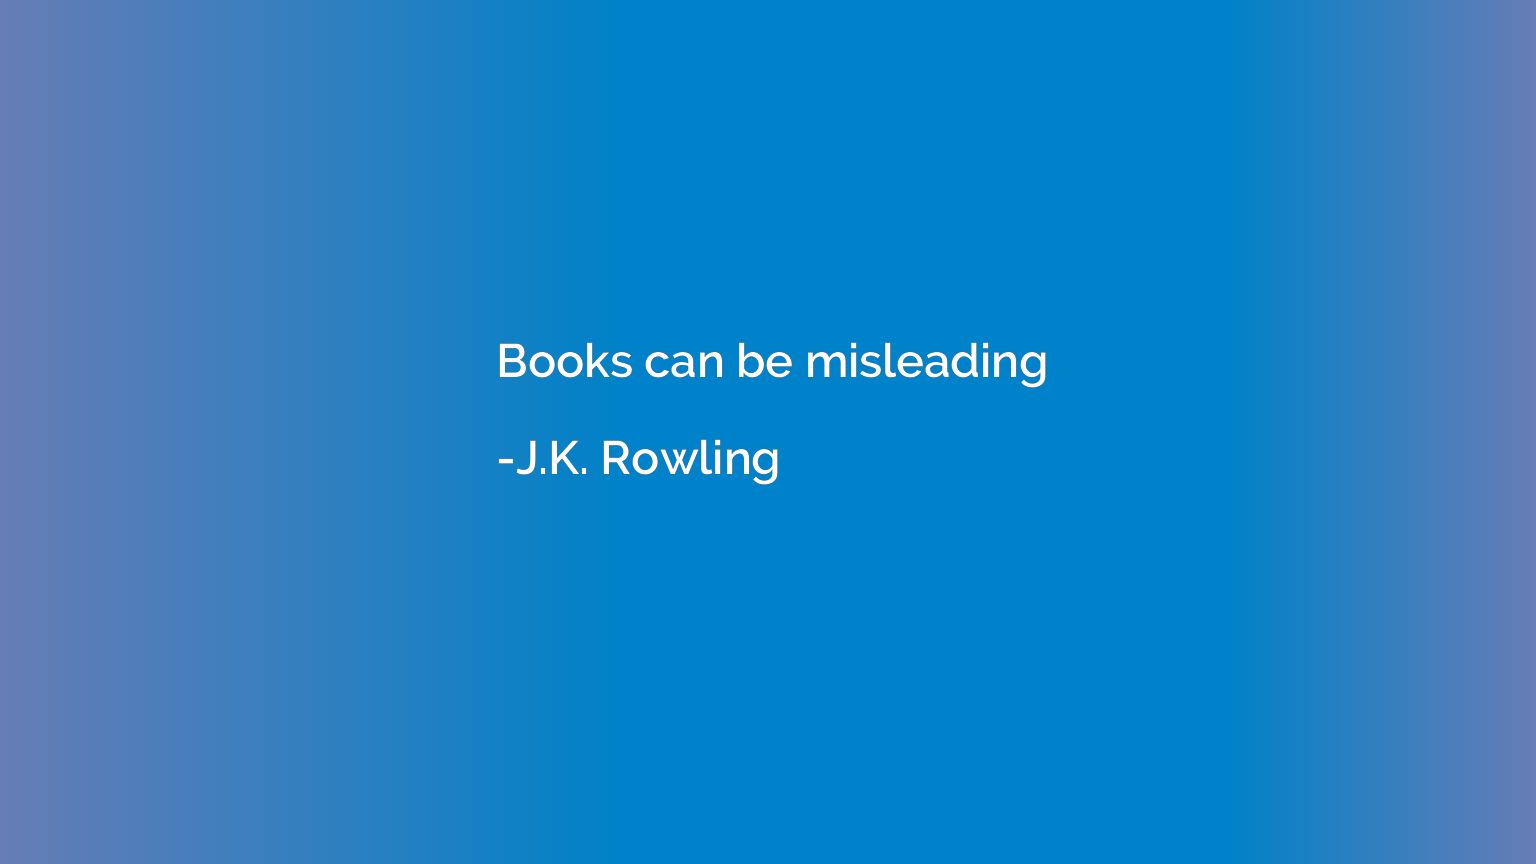 Books can be misleading